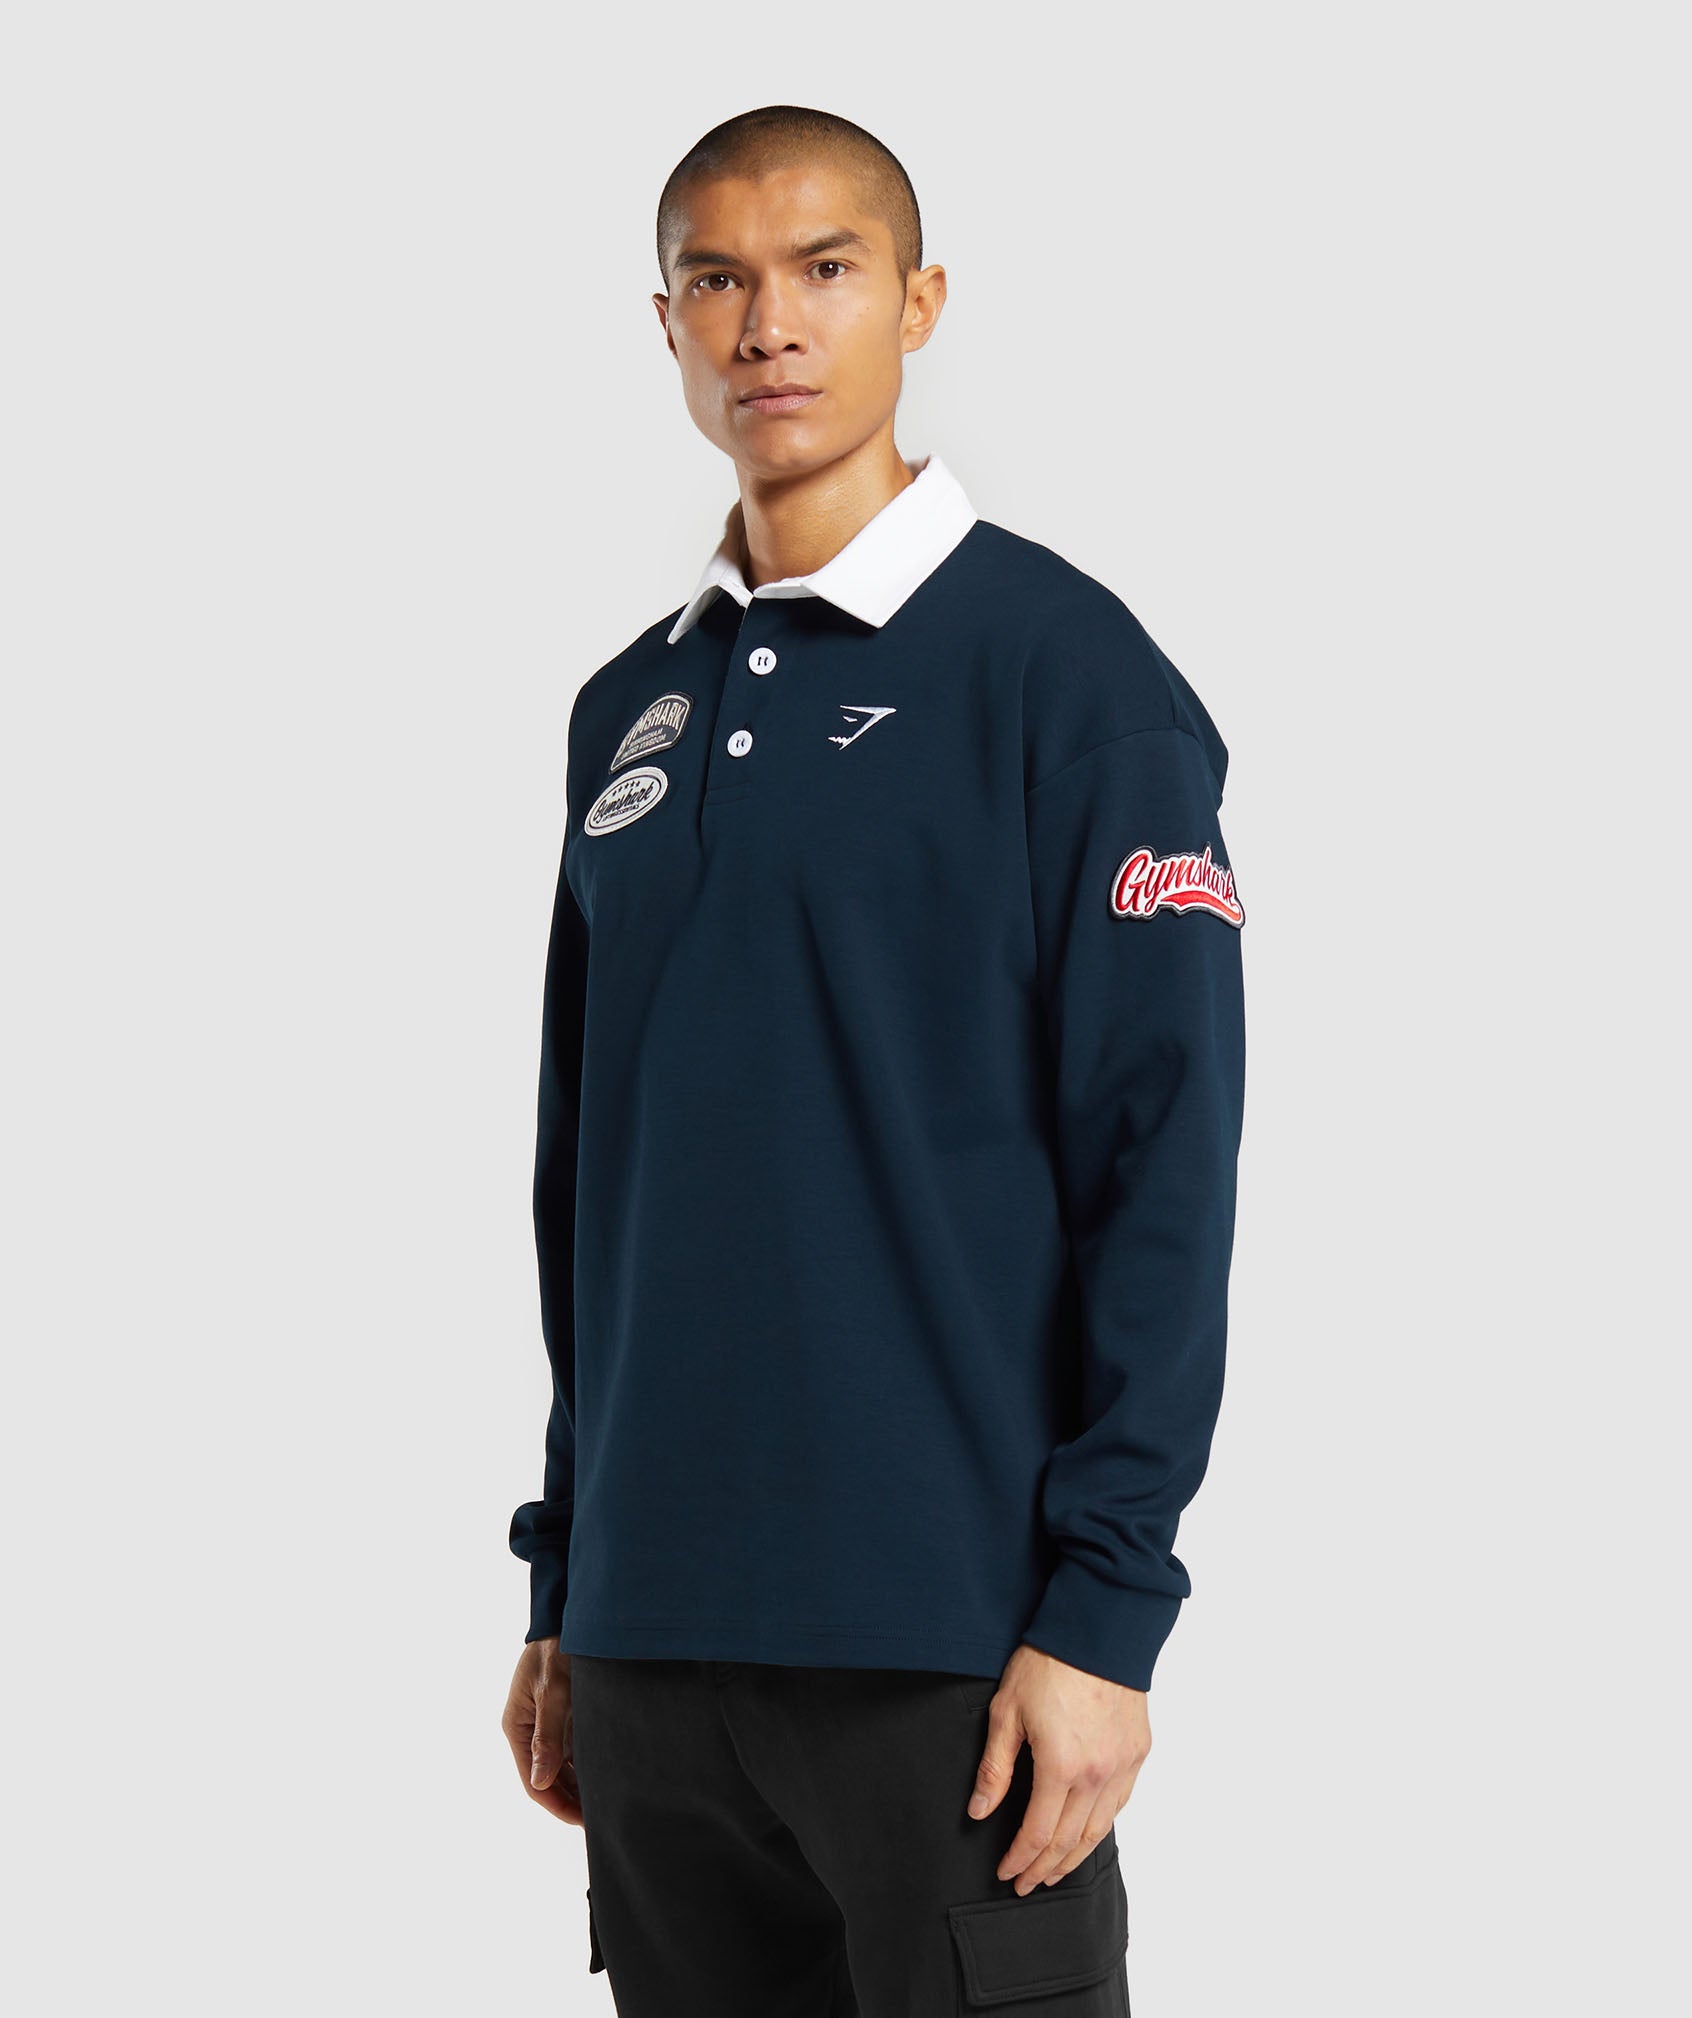 Rugby Shirt in Navy/White - view 3